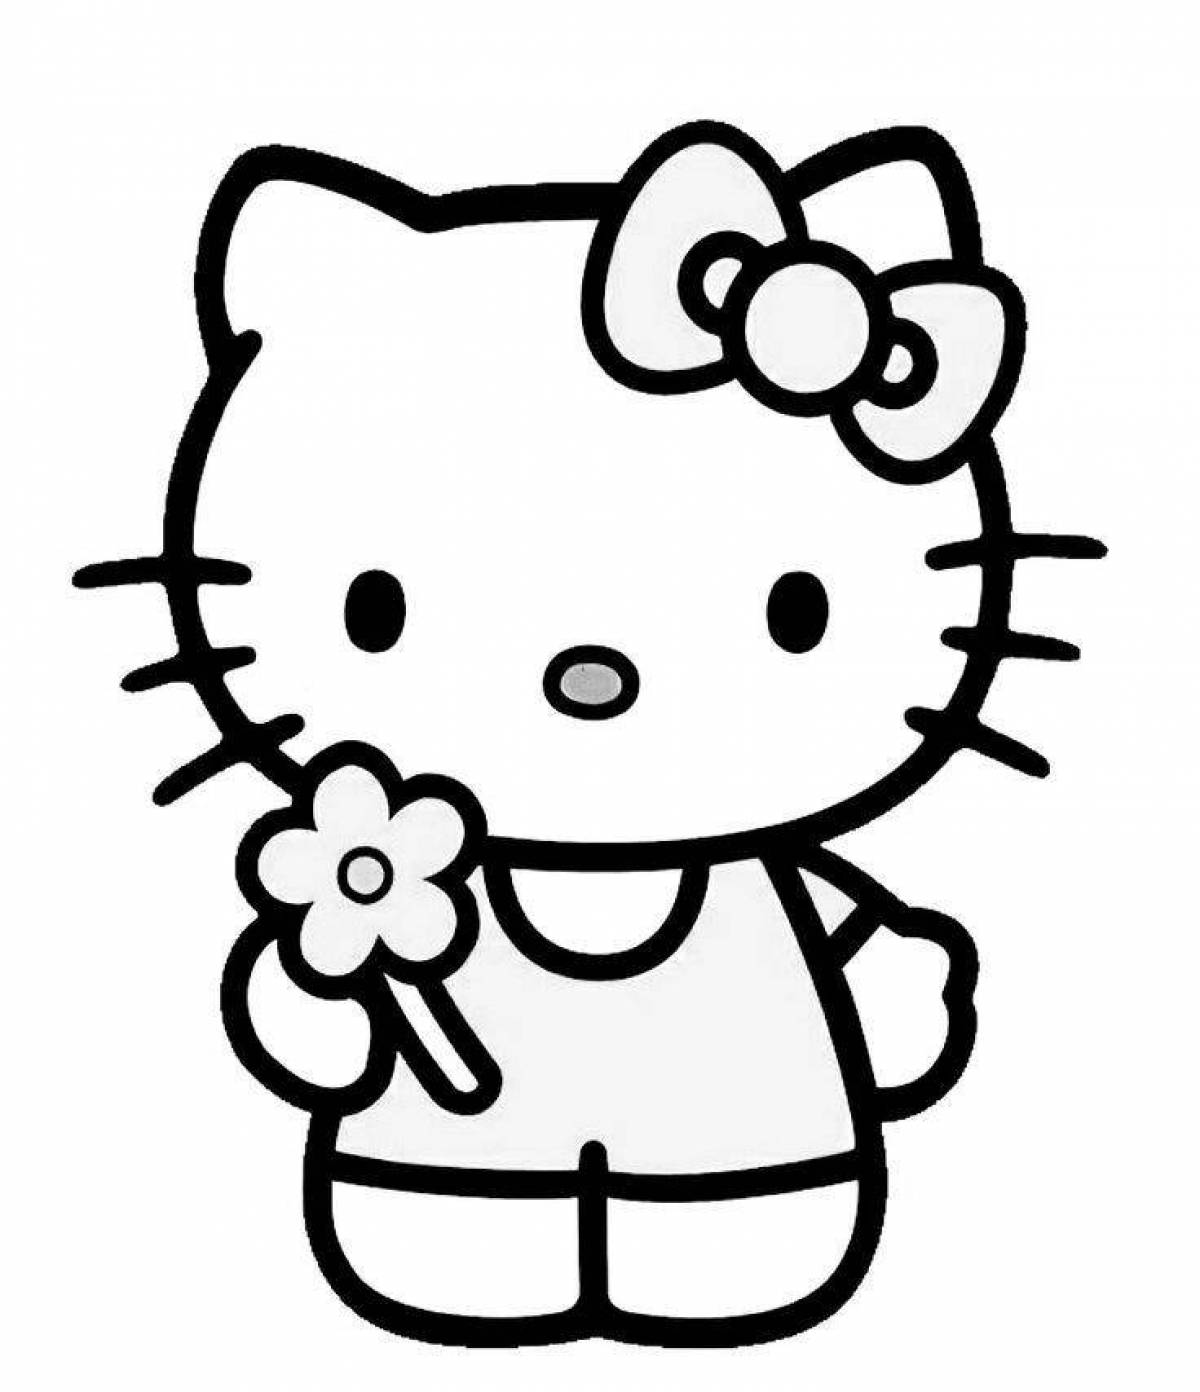 Cheerful hello kitty regular without bow and clothes